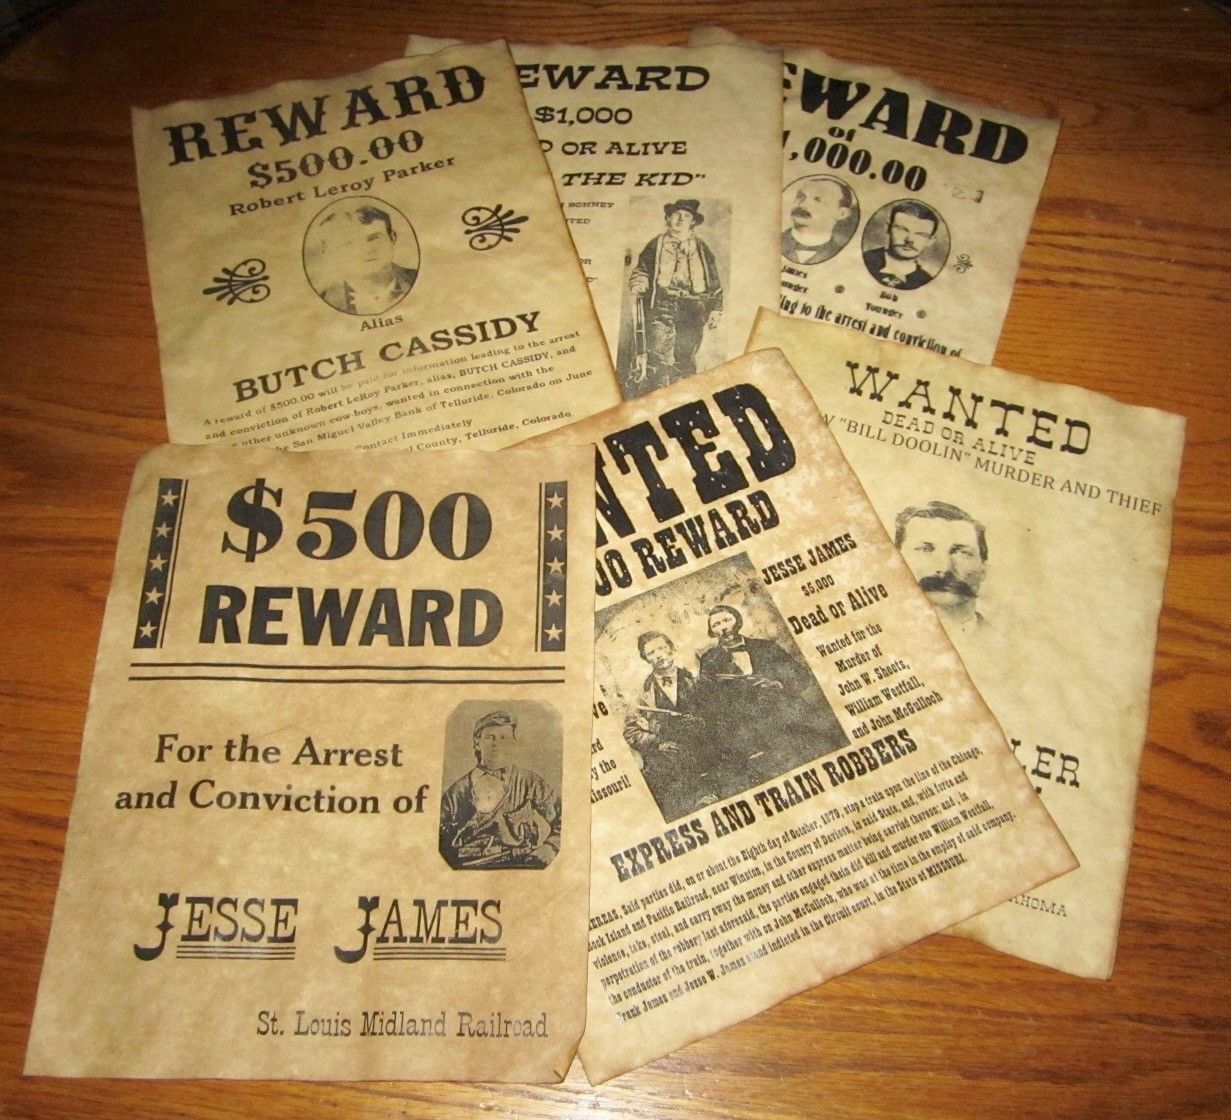 Butch Cassidy Old West Wanted Posters Jesse James Billy the Kid Younger Gang NEW